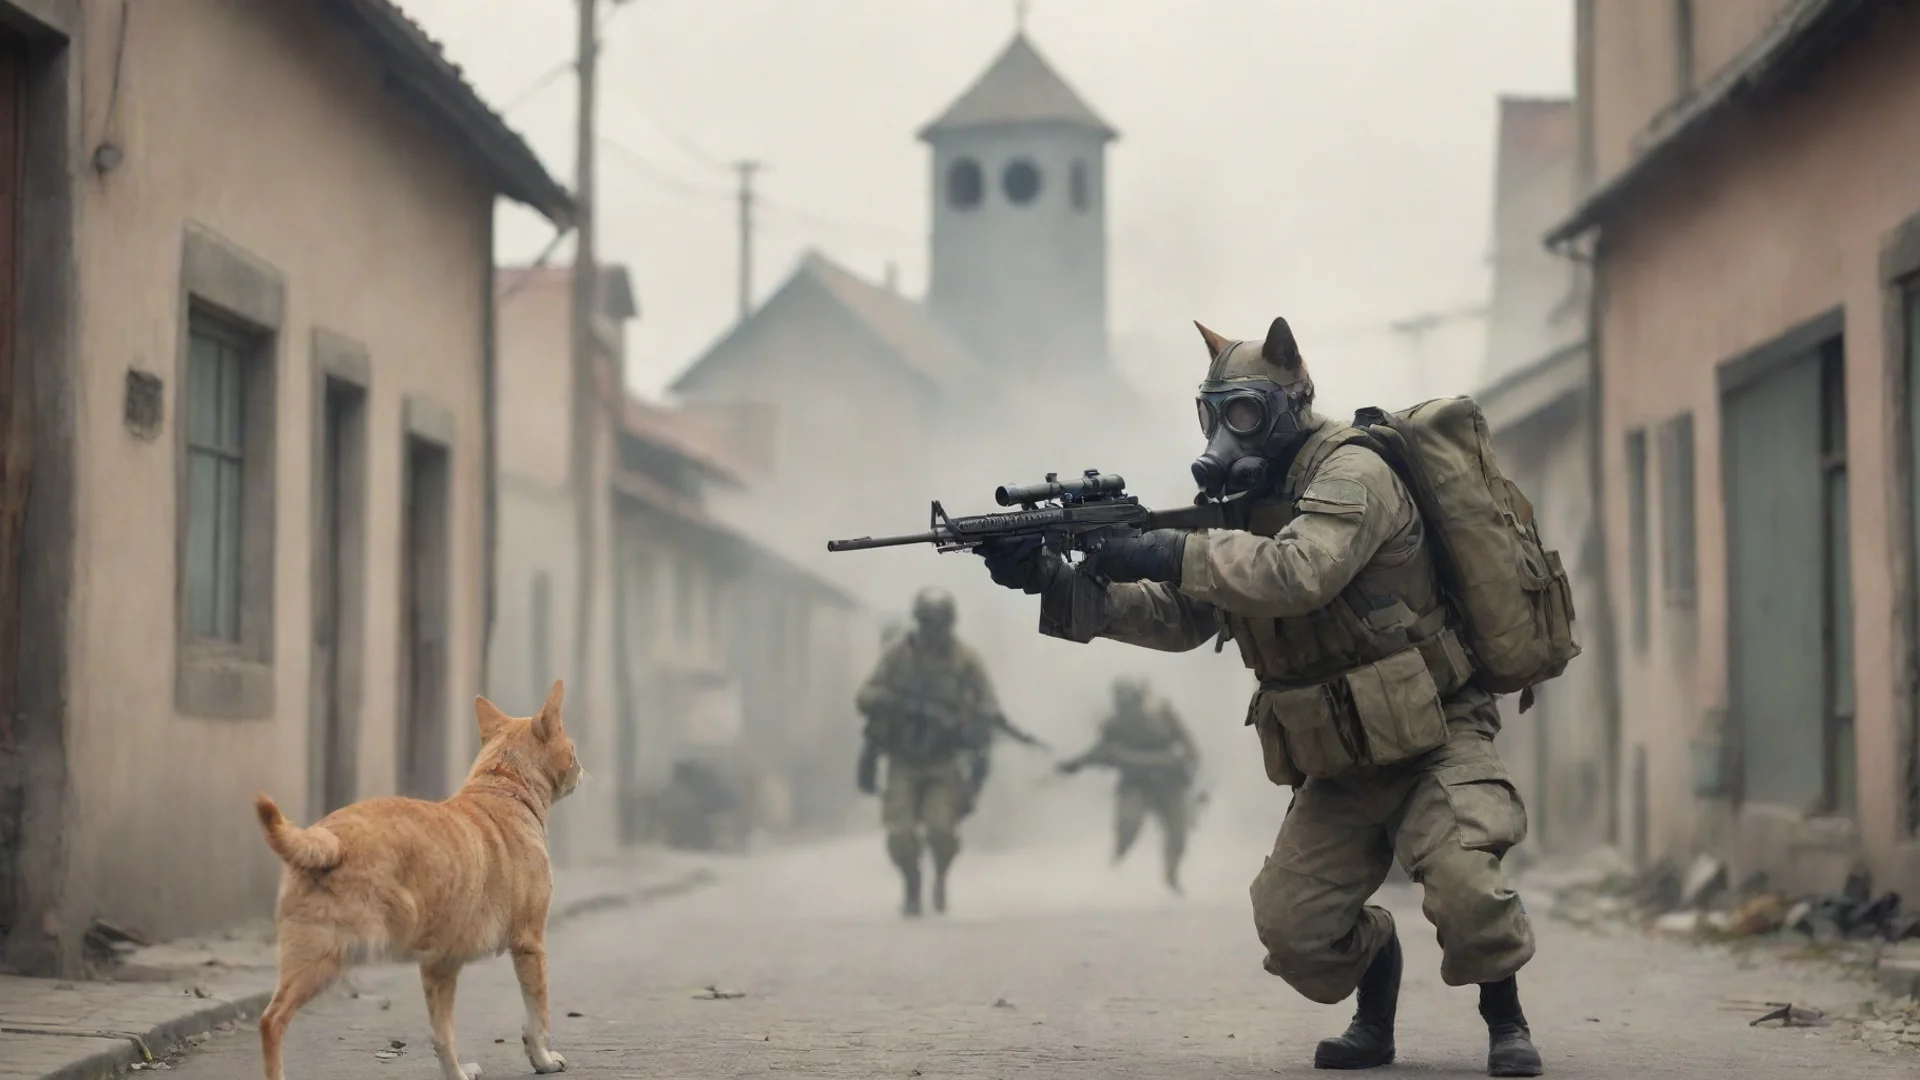 aicat soldier with gas mask shooting dog soldier in a small town wide